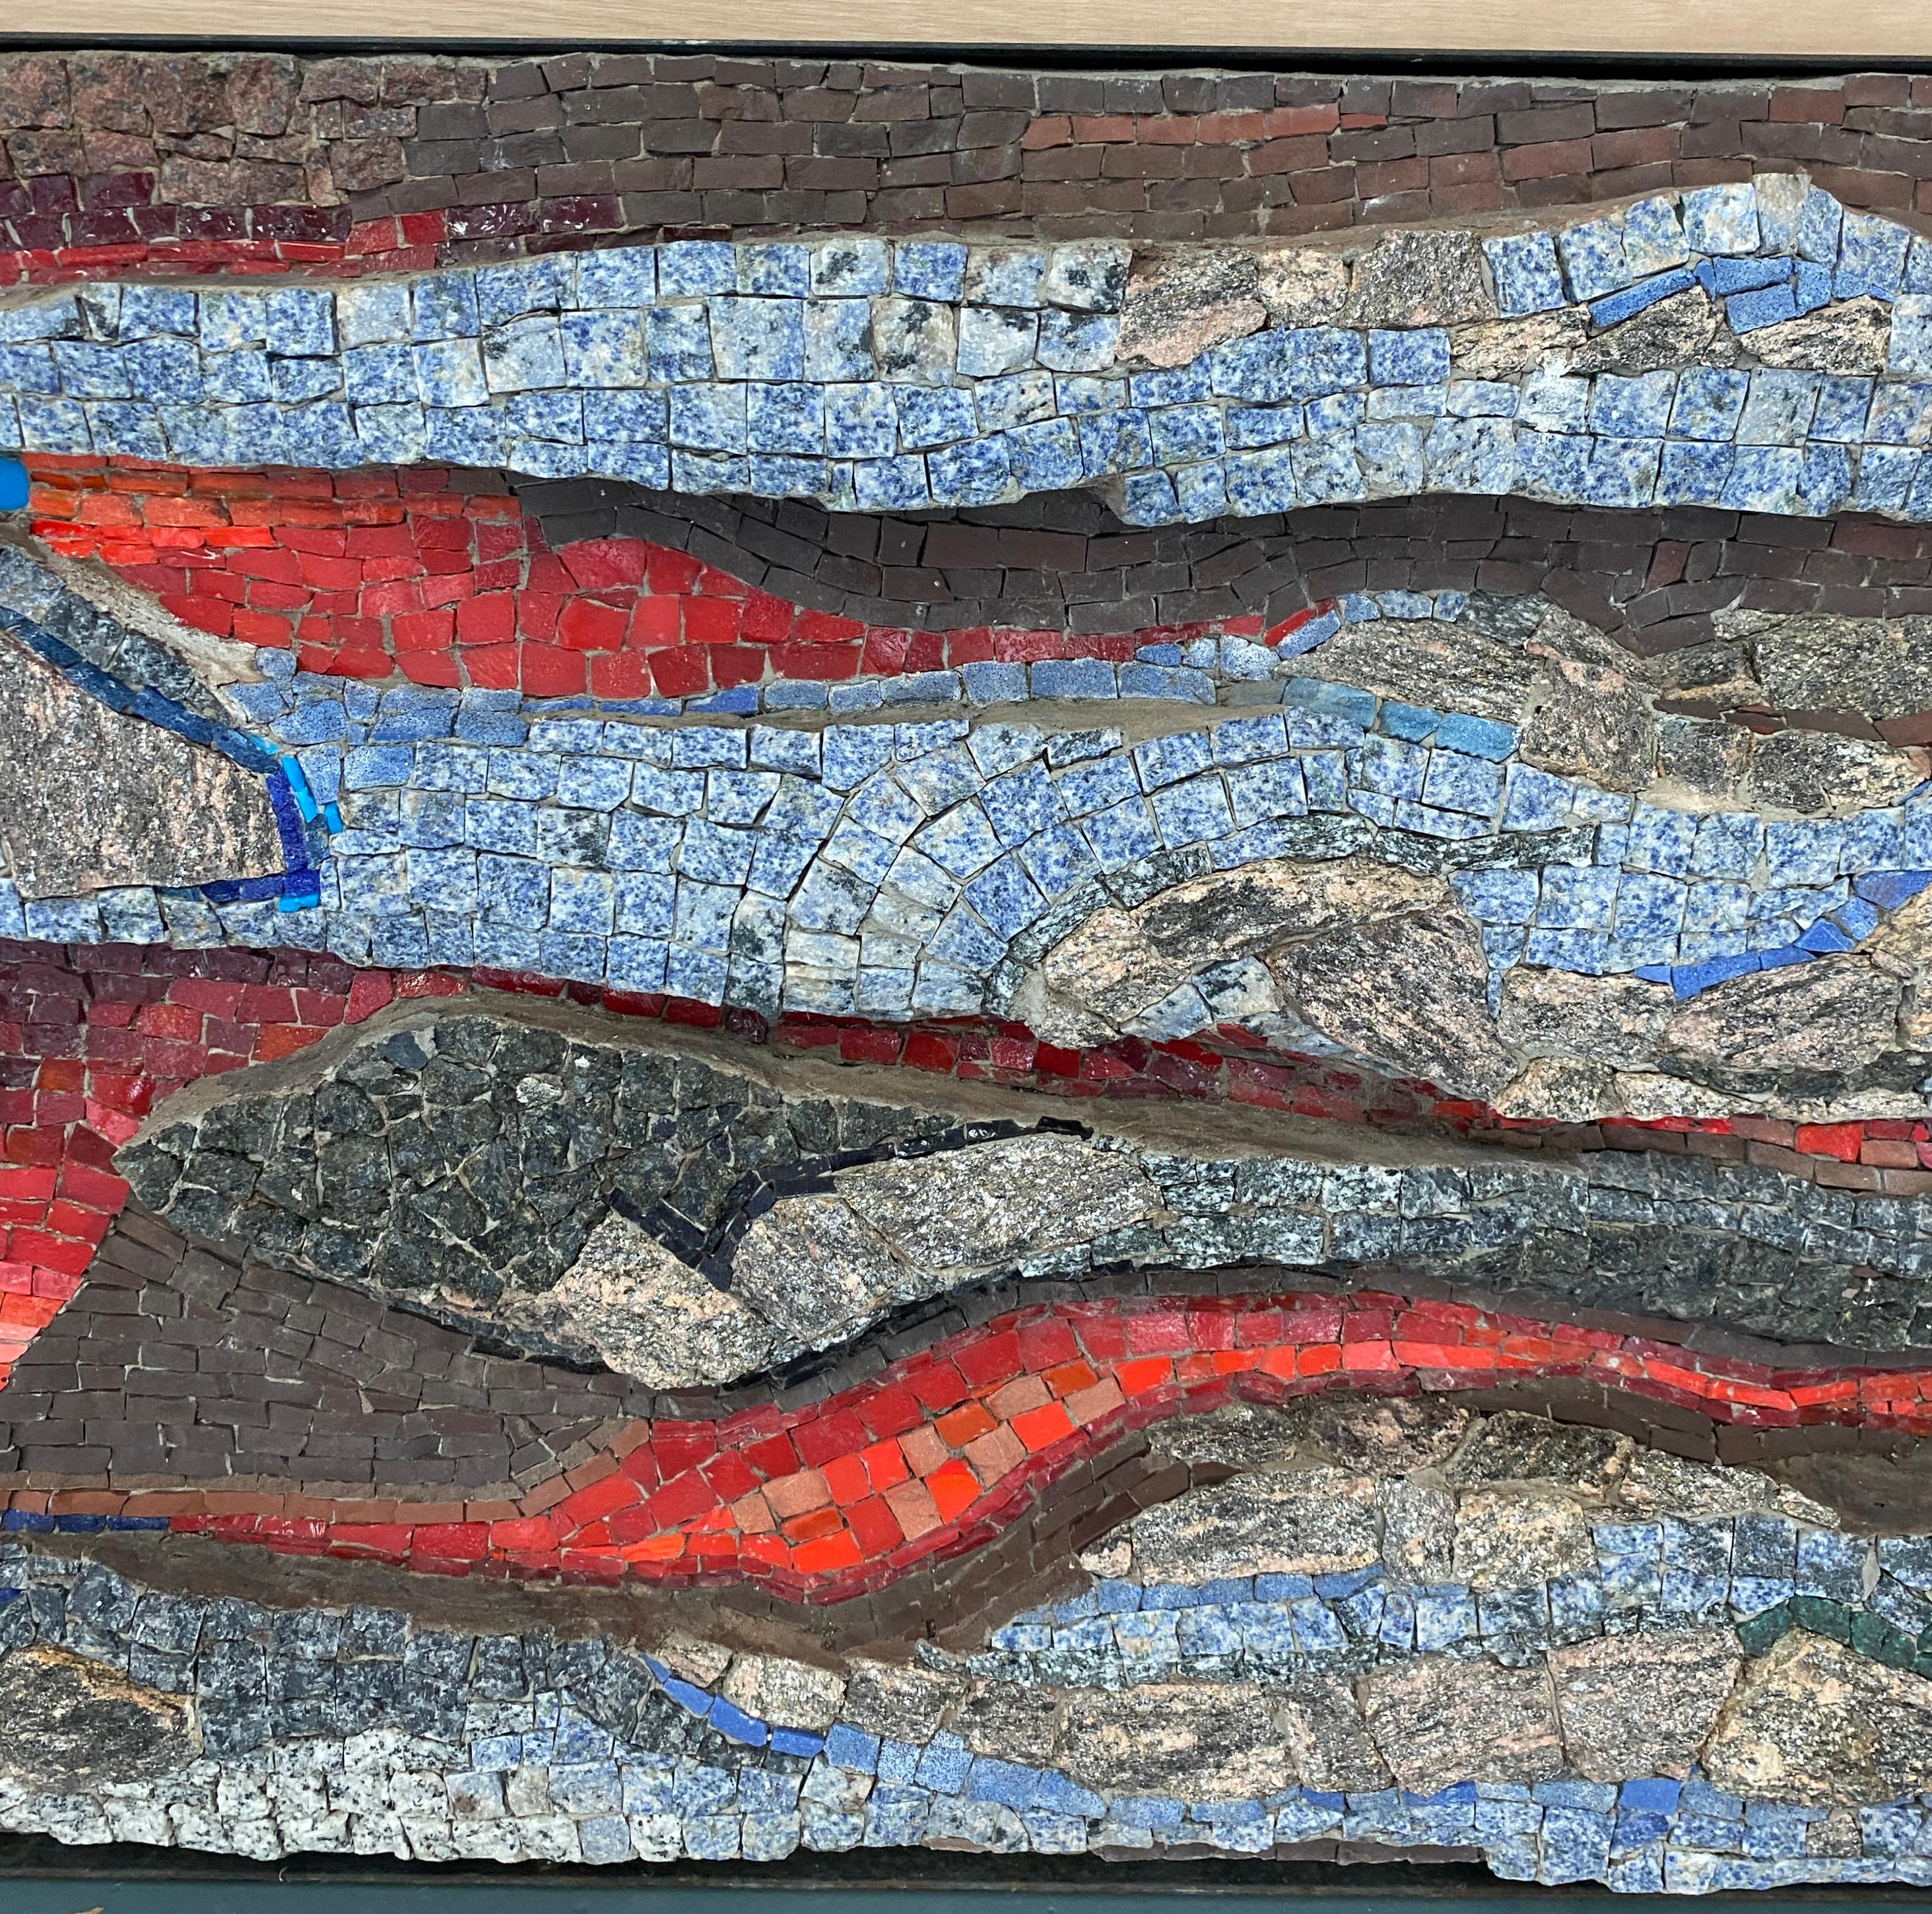 Mosaic panel made of handcut Venetian glass, ceramic and multiple types of granite on a special composite in a steel frame. The composite created by the artist, Heidi Melano is a combination of materials that allow the sculpture to be displayed